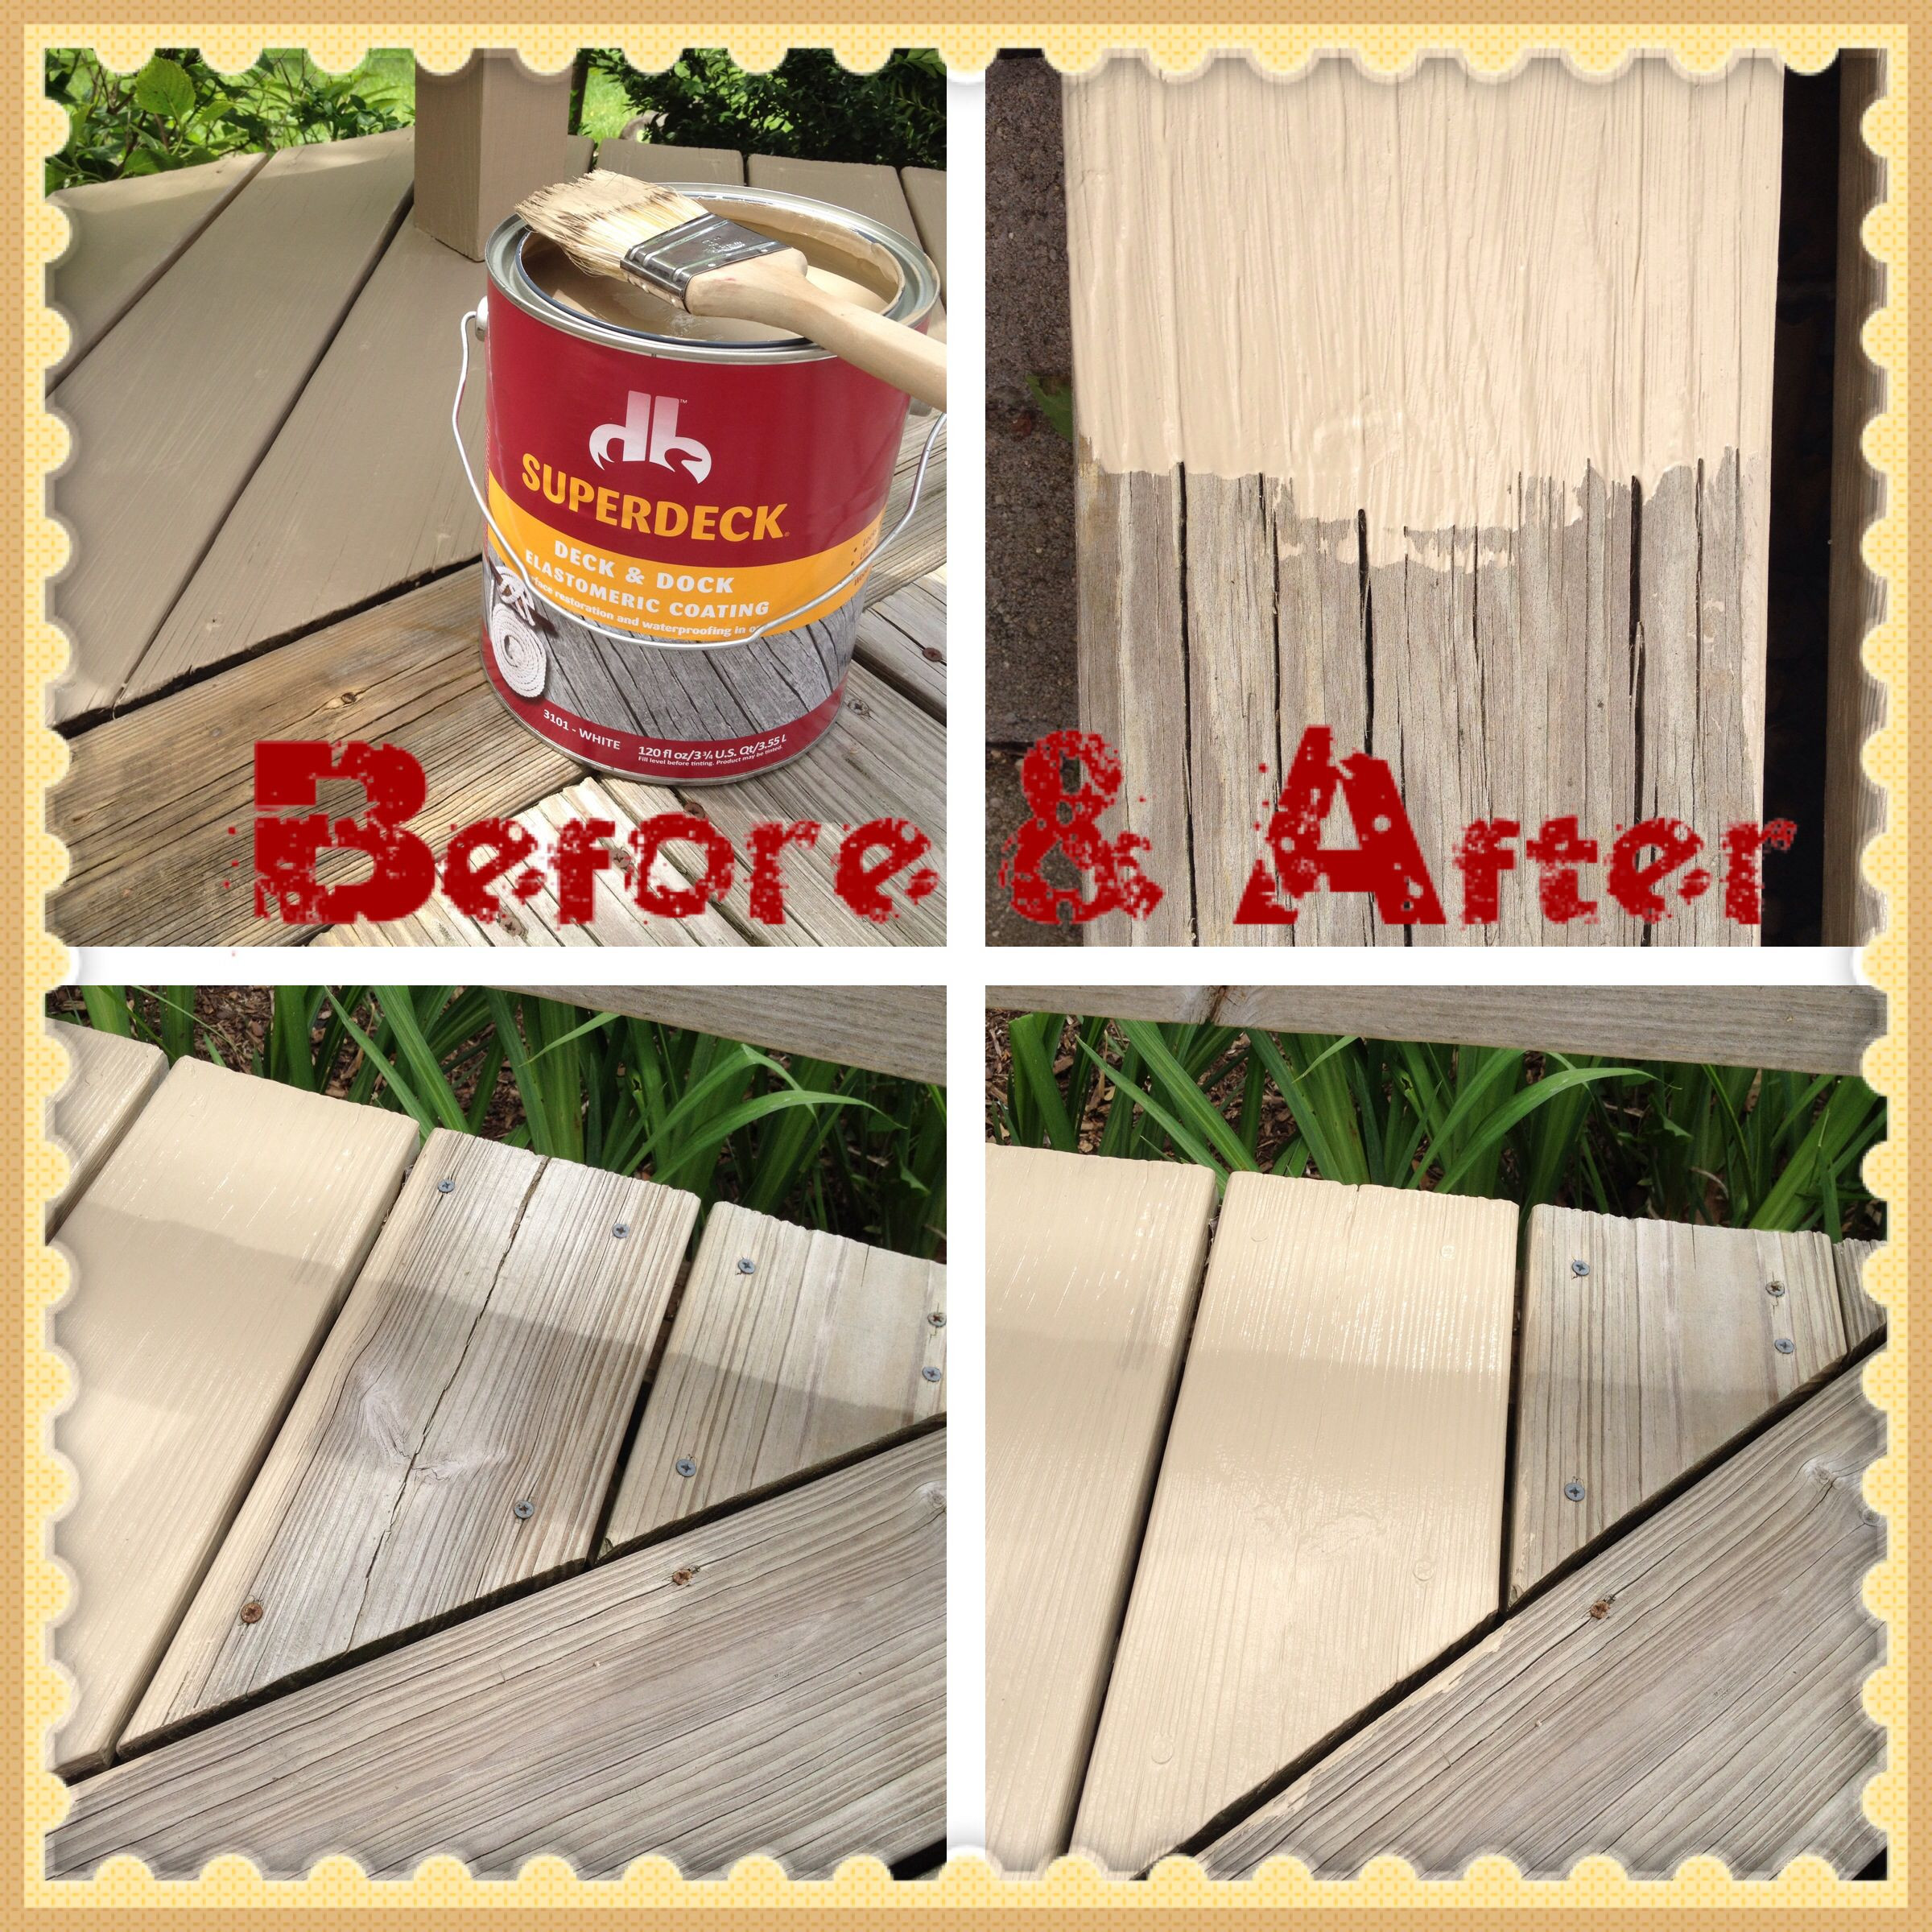 Deck And Dock Paint
 DONE Sherwin Williams Superdeck Deck & Dock paint for